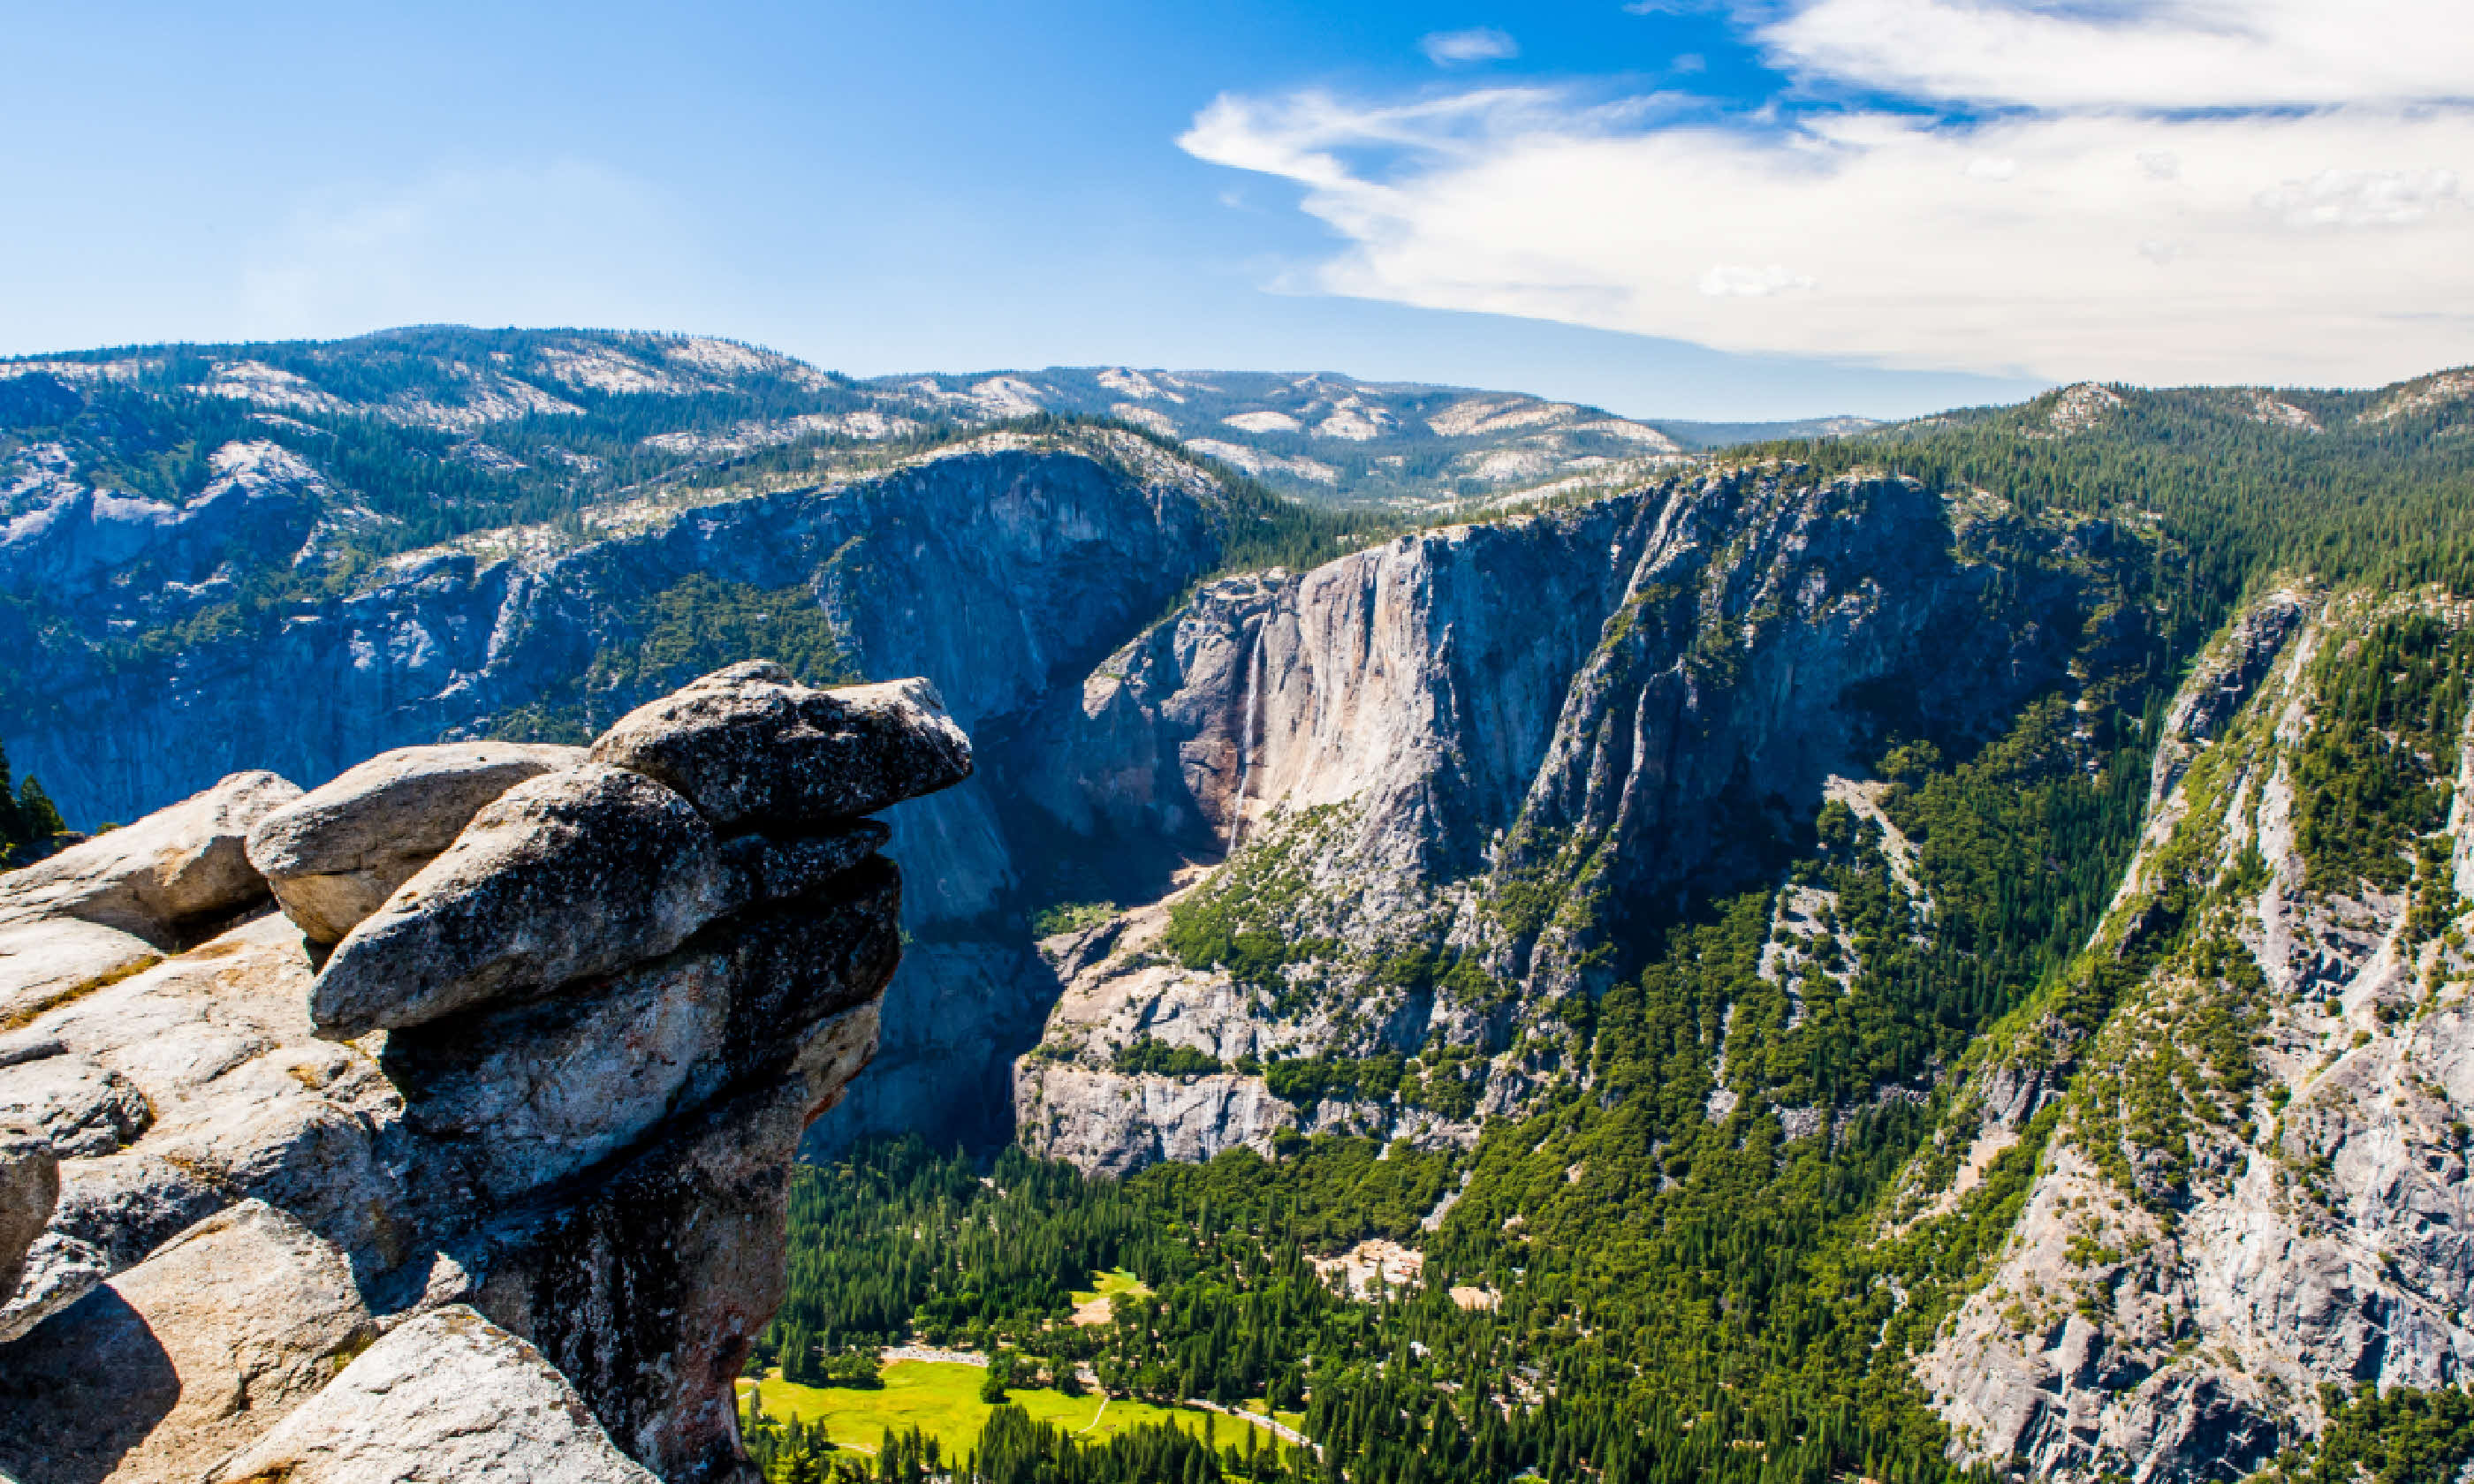 Panoramic view from Glacier Point over Yosemite Valley (Shutterstock)